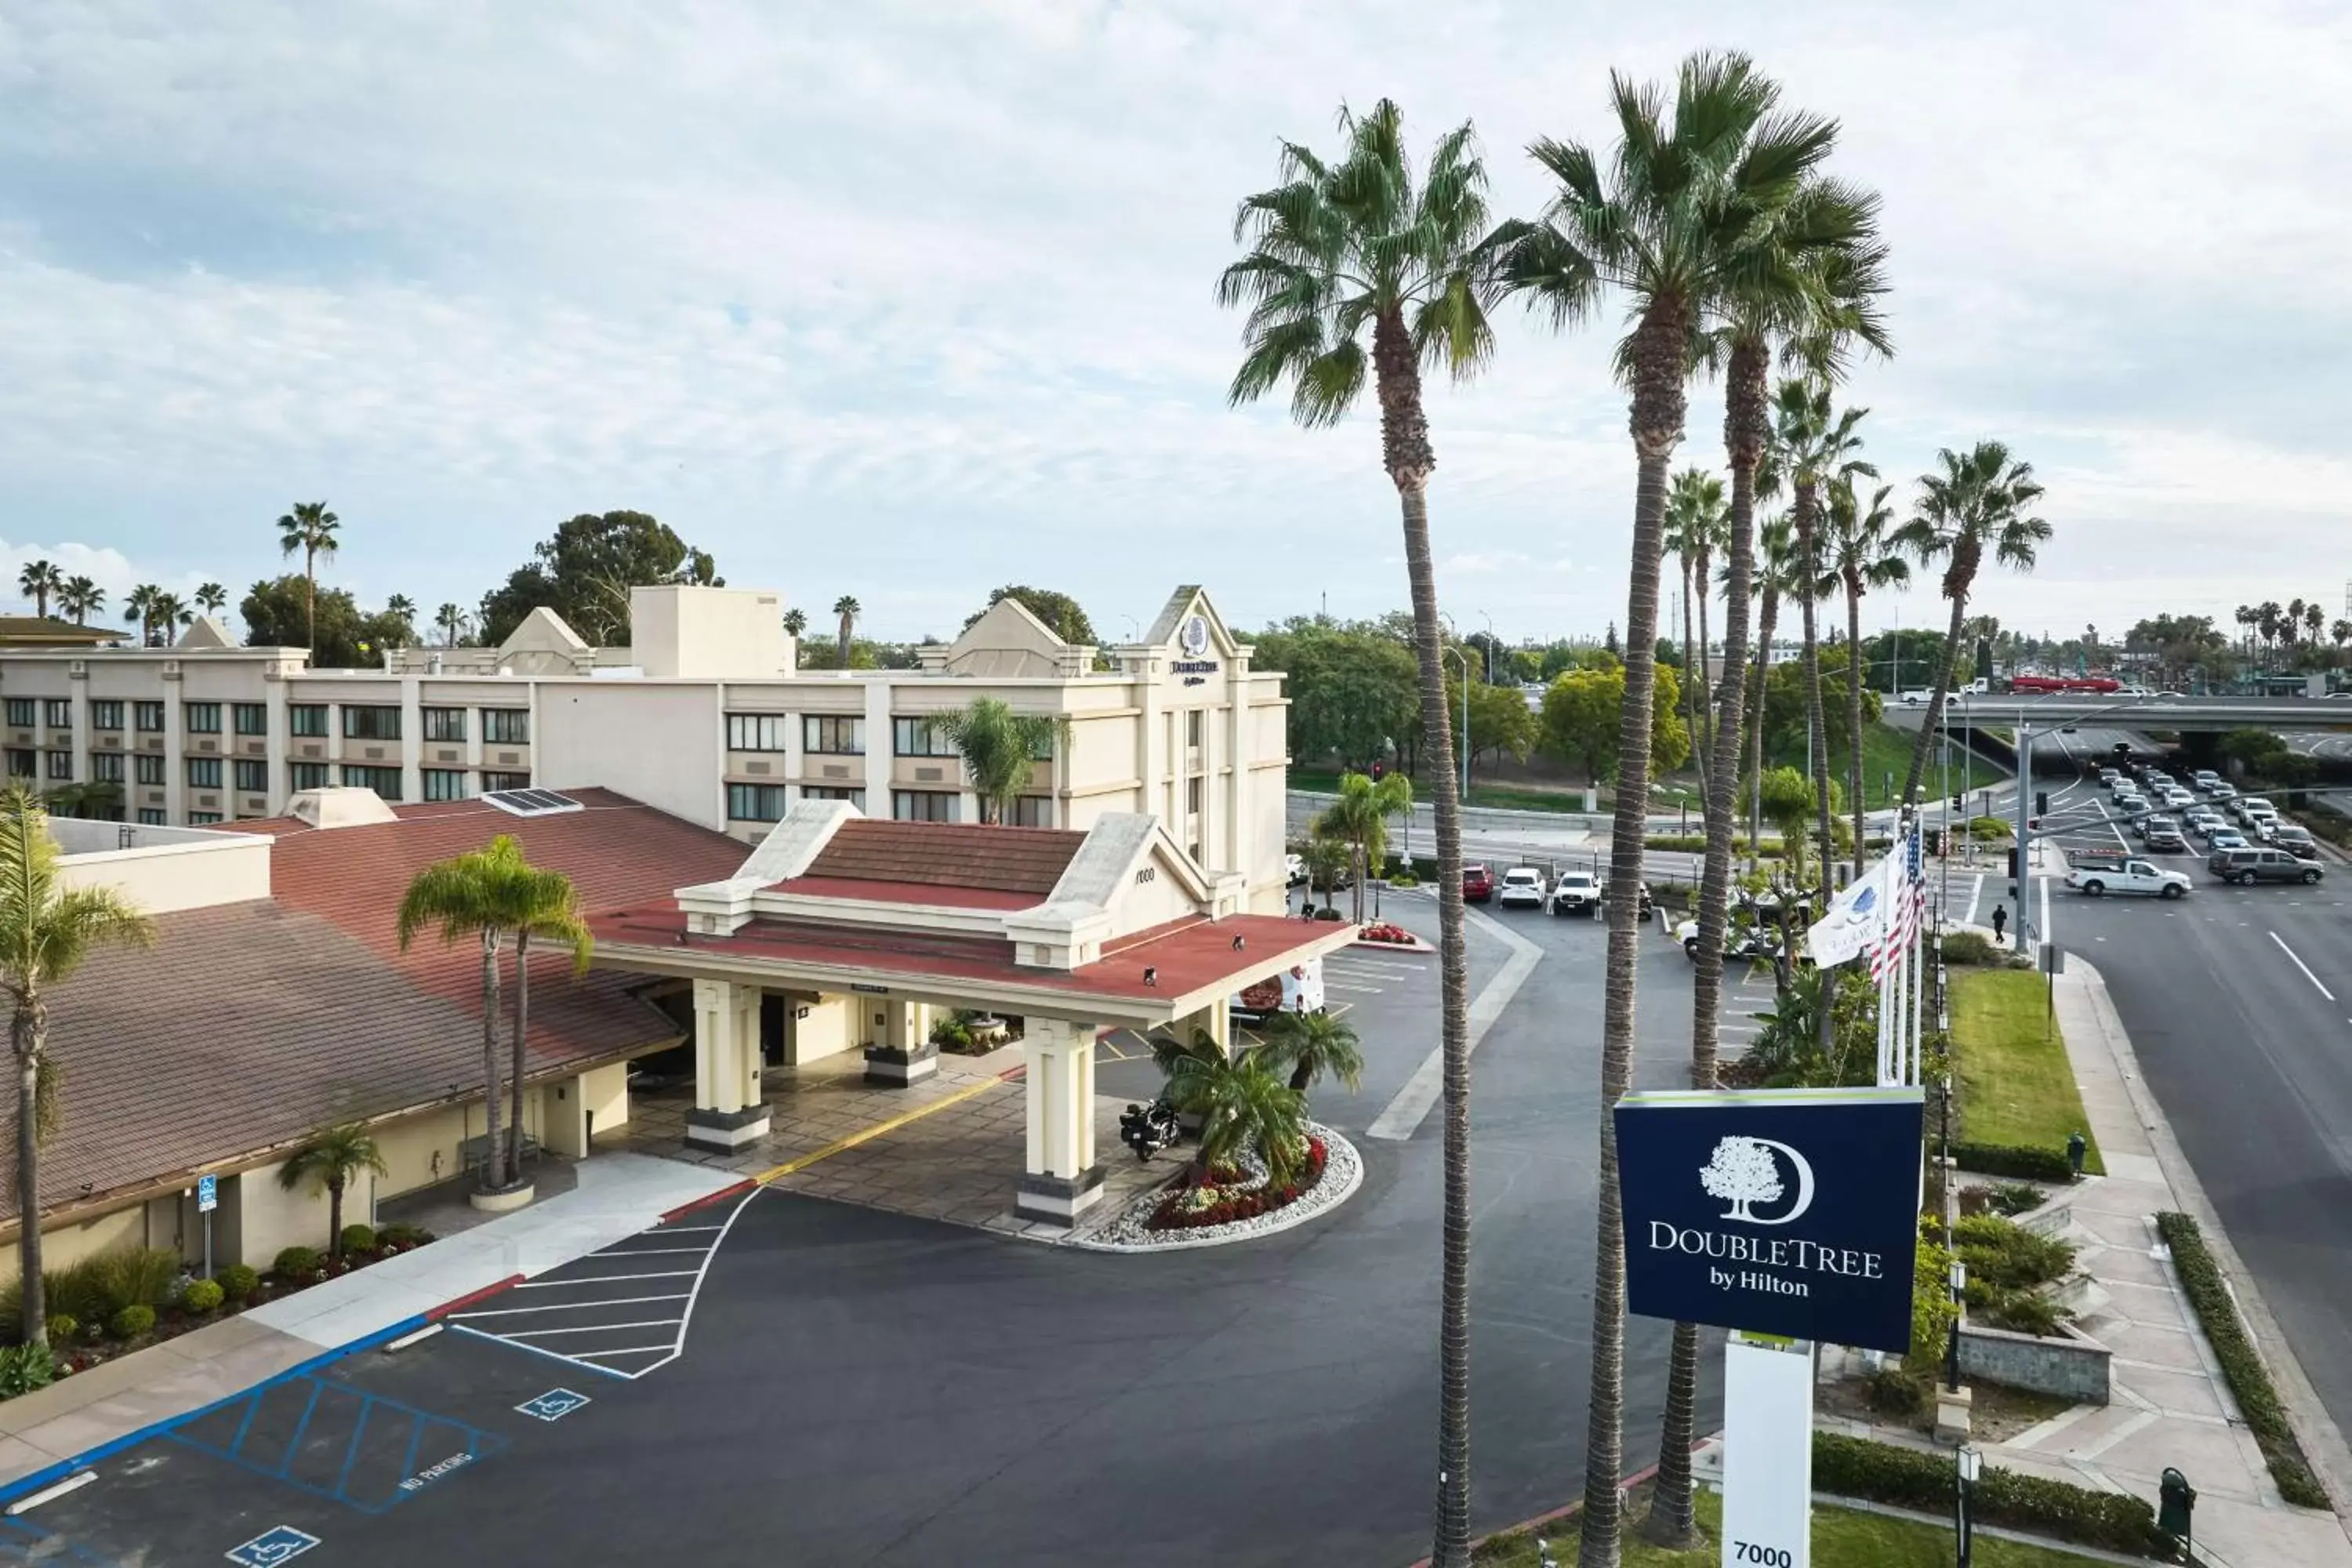 Property building in Doubletree by Hilton Buena Park